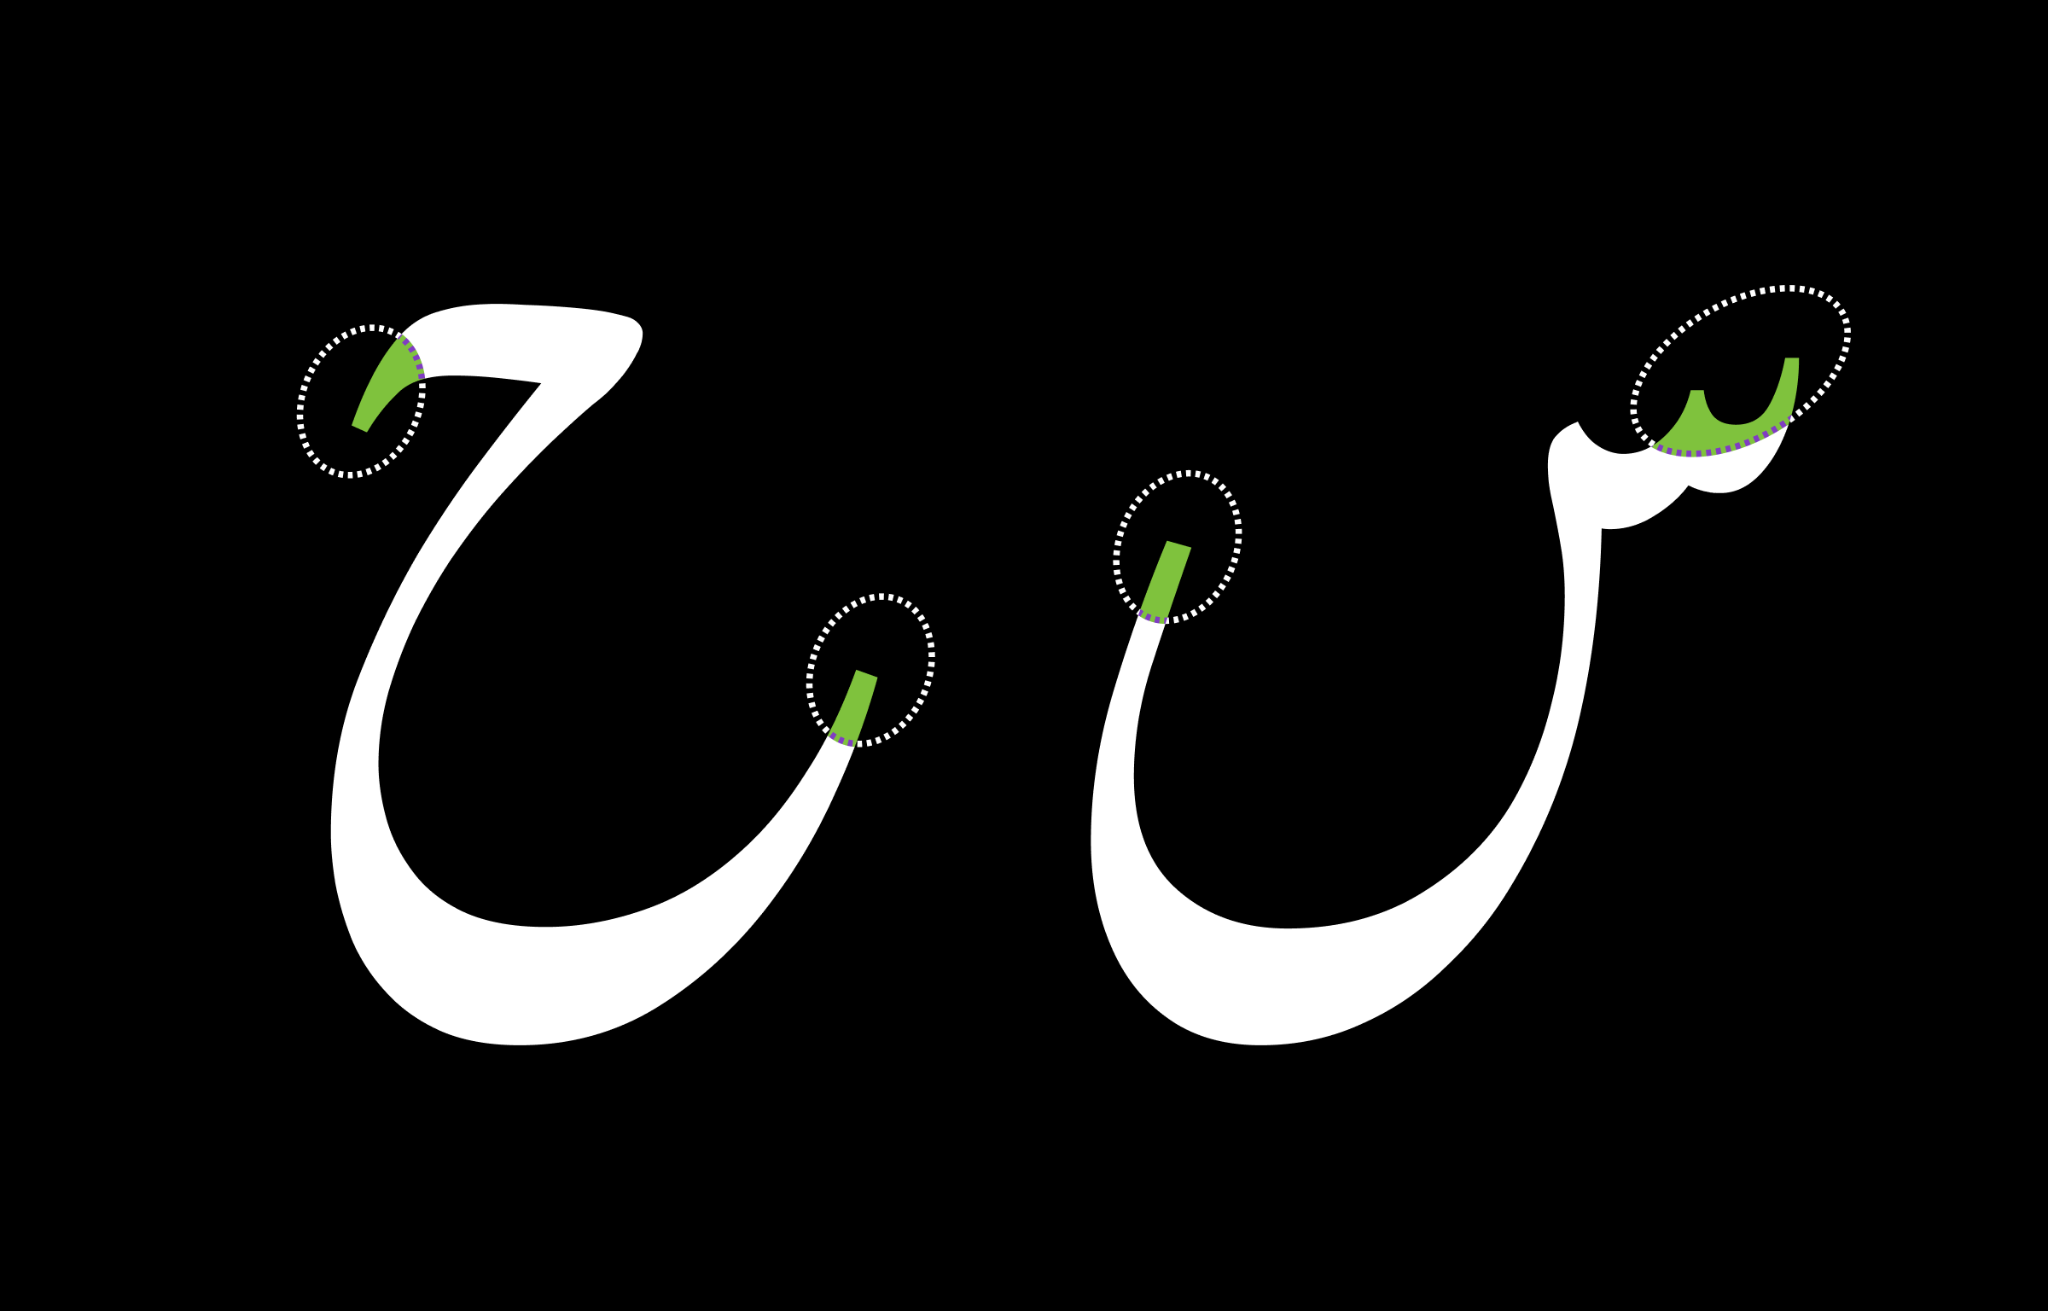 Two Urdu letters in white on black background